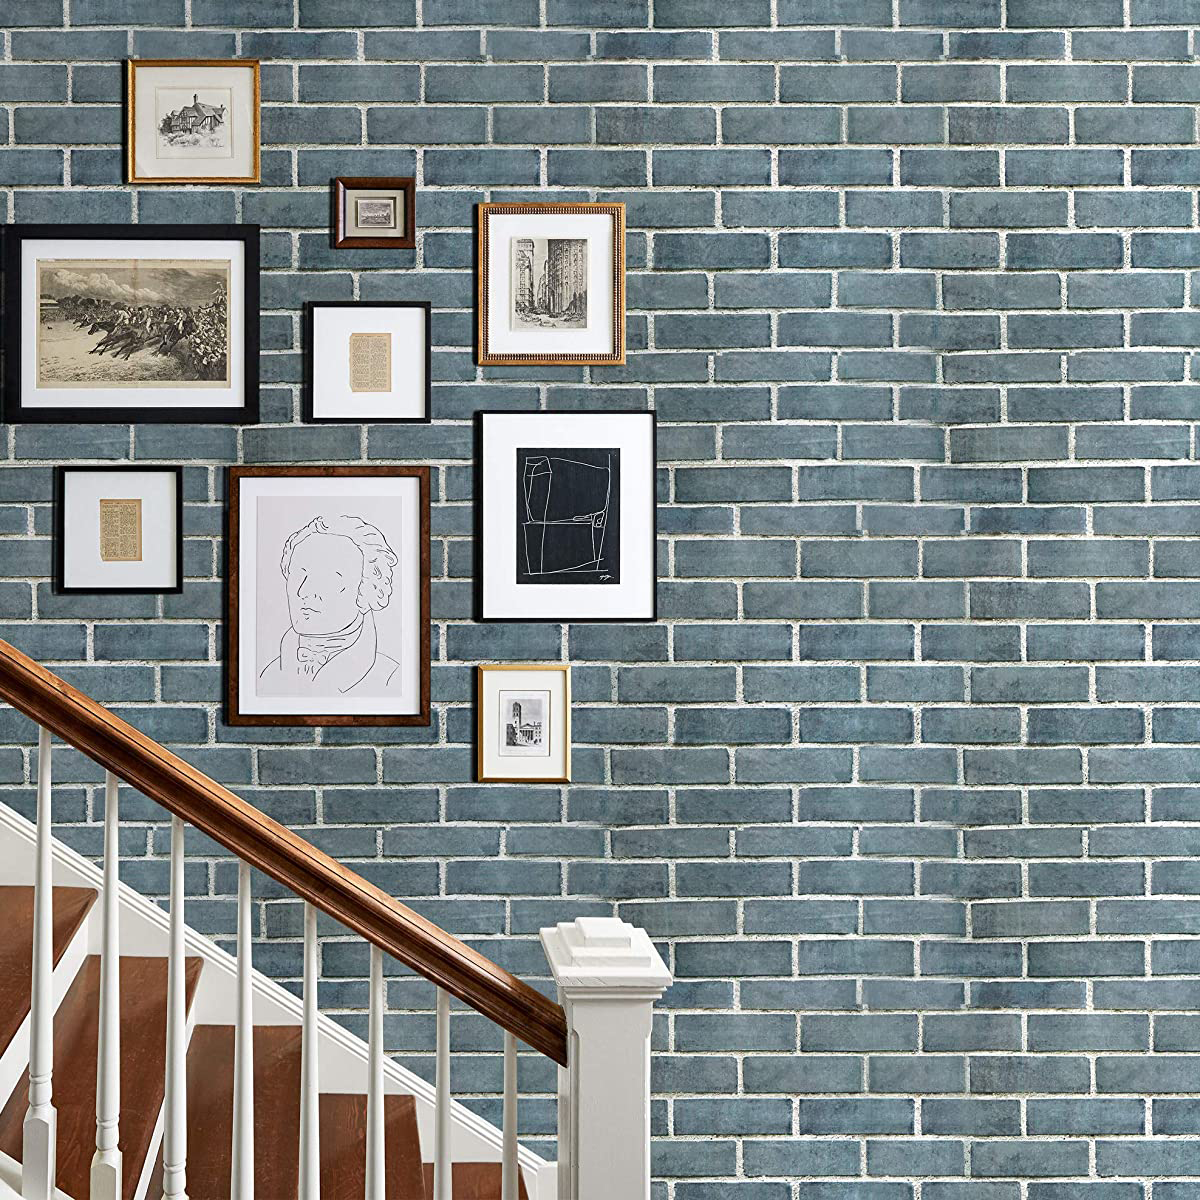 393.7x19.7in Non-Woven Wallpaper, 3D Effect Brick Wall Panel(No Glue) - image 1 of 10